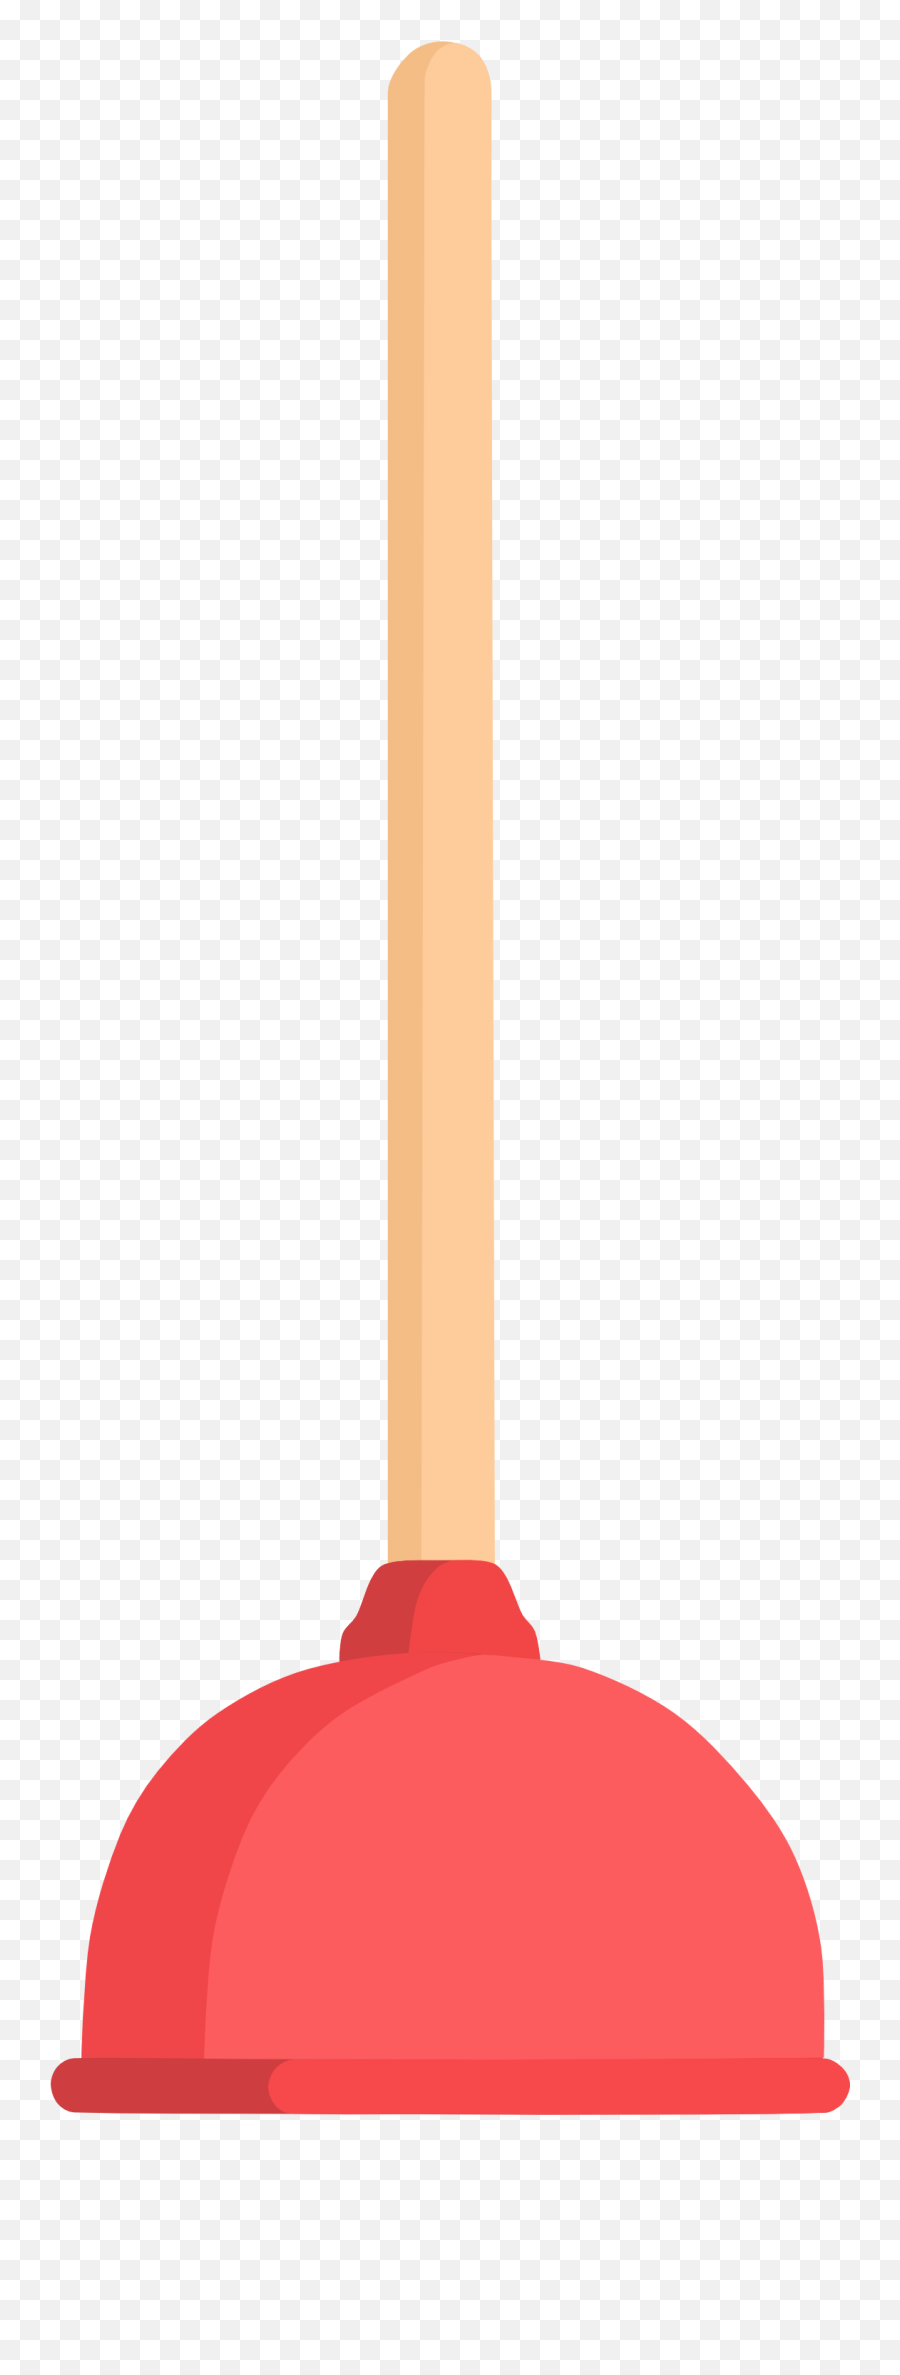 Plunger Png Images Transparent Background Play - Snow Shovel,Shovel Transparent Background